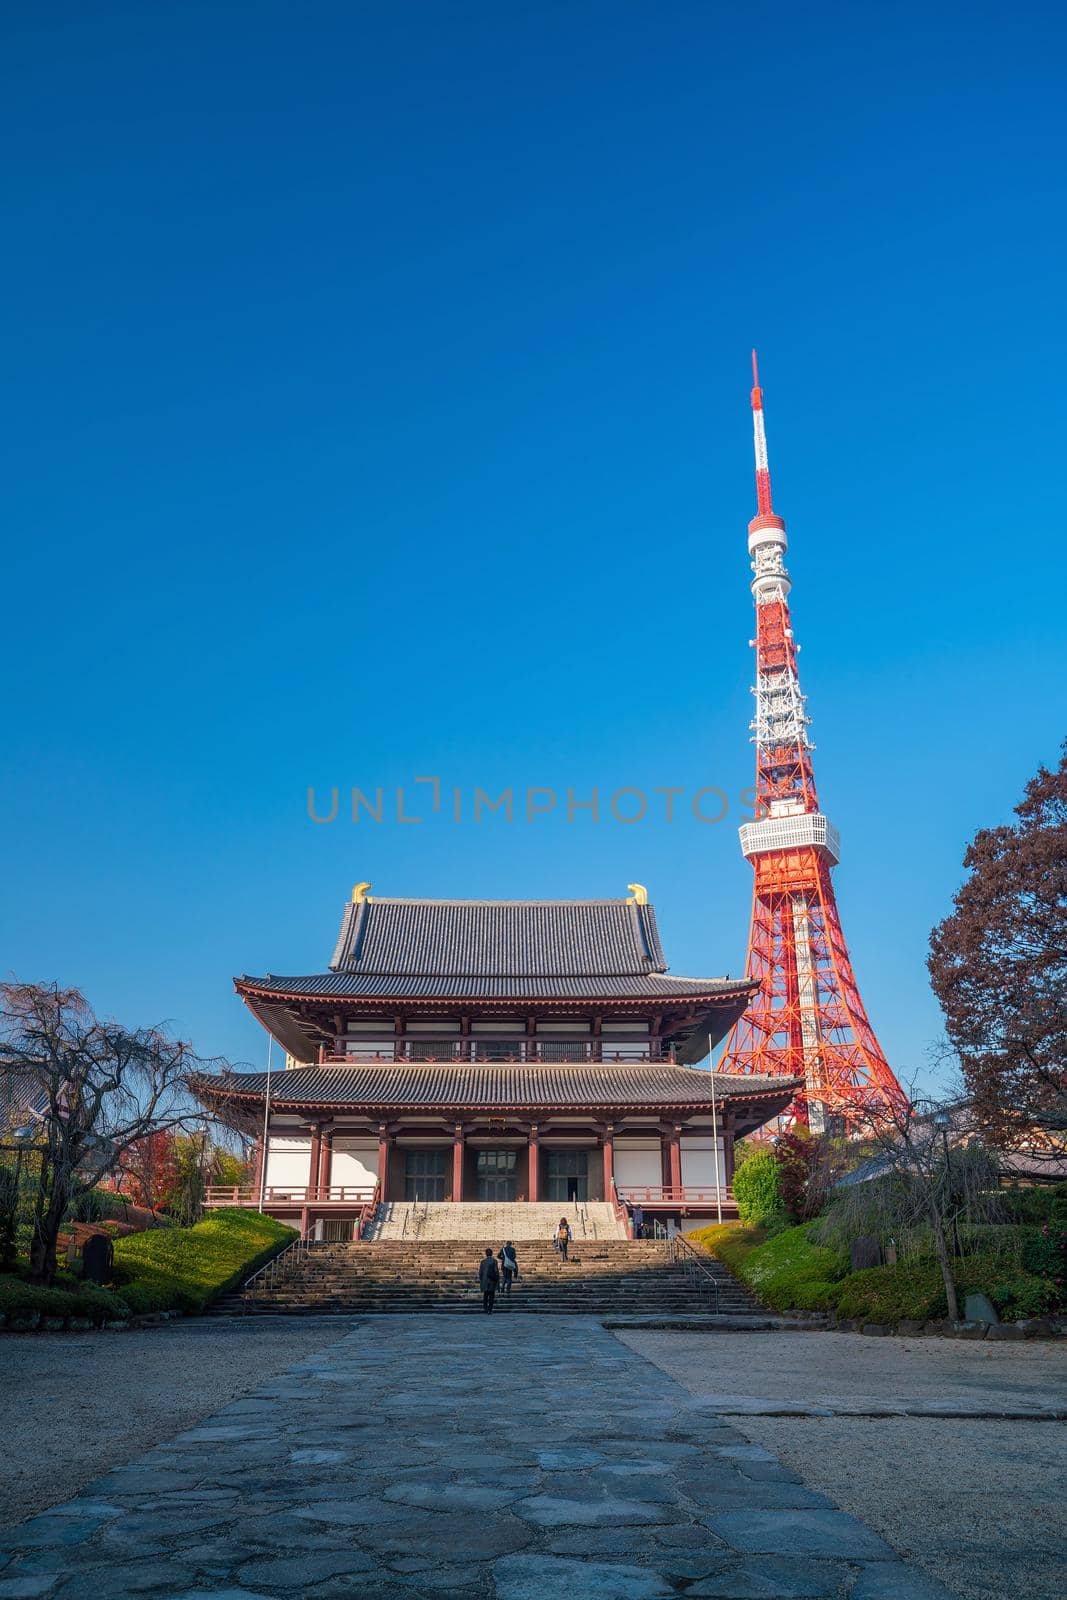 View of Zojoji Temple with Tokyo Tower in background , Japan.

